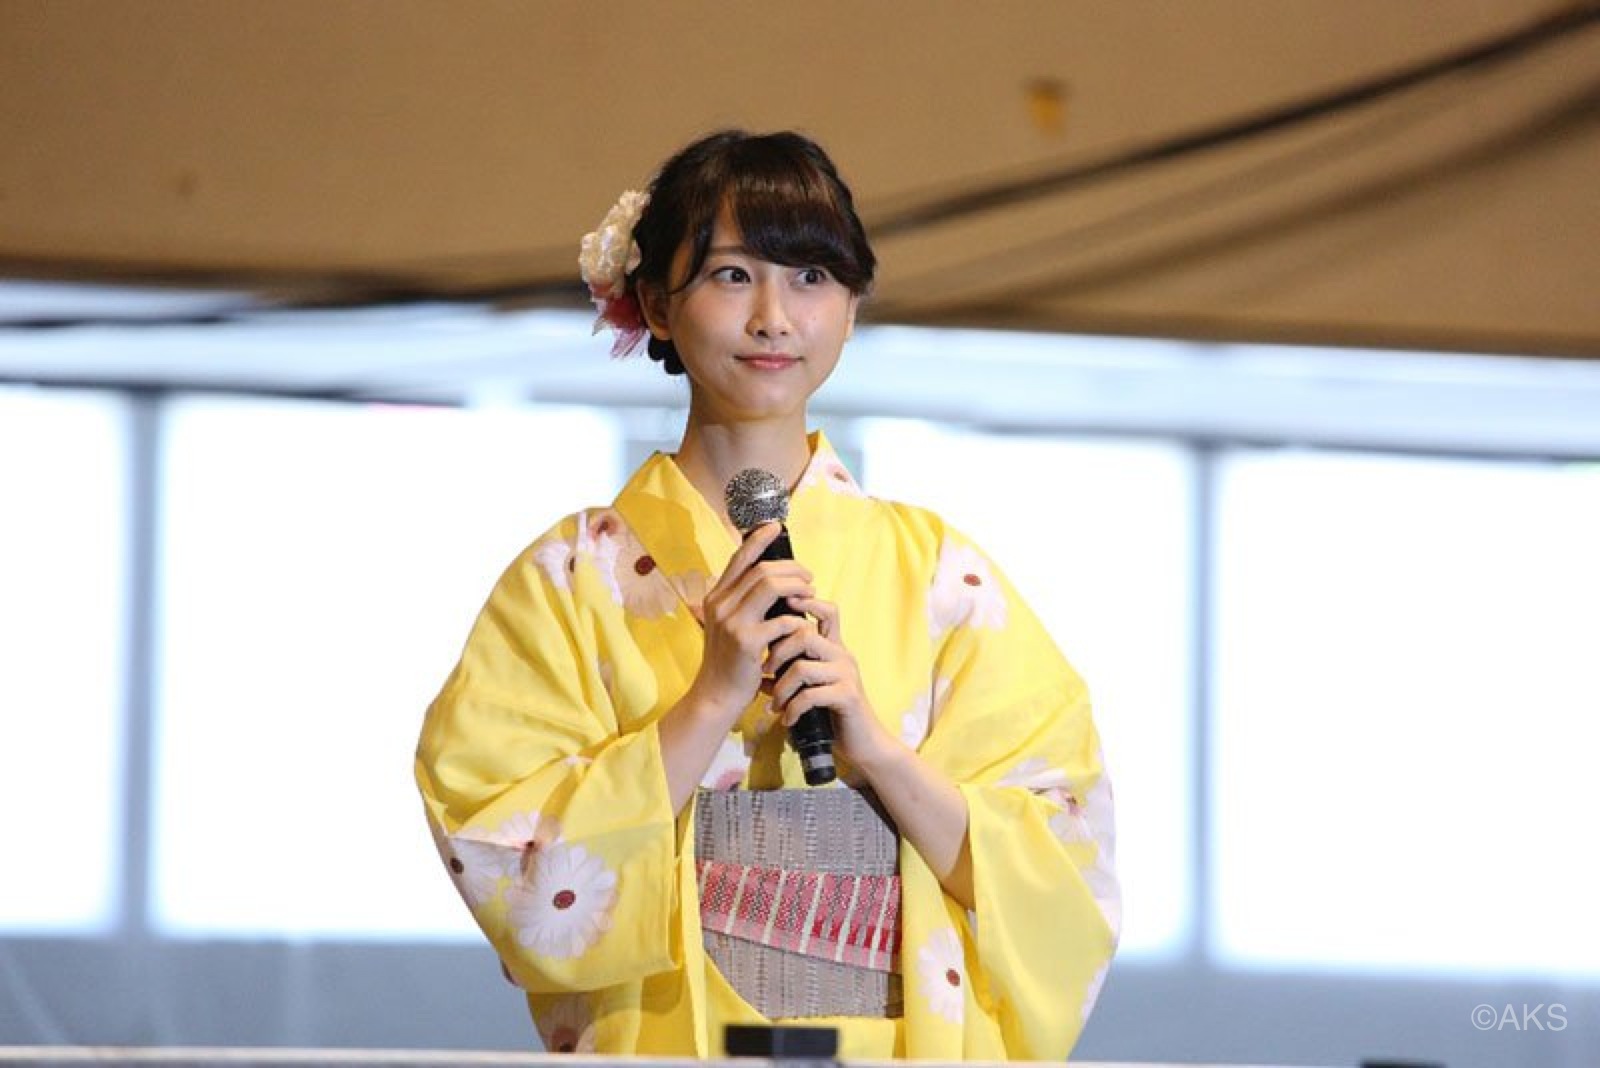 3,000 Fans Competing For Nagoya Bus Tour With Rena Matsui! Don’t Miss The Last Moments Before Her Graduation!